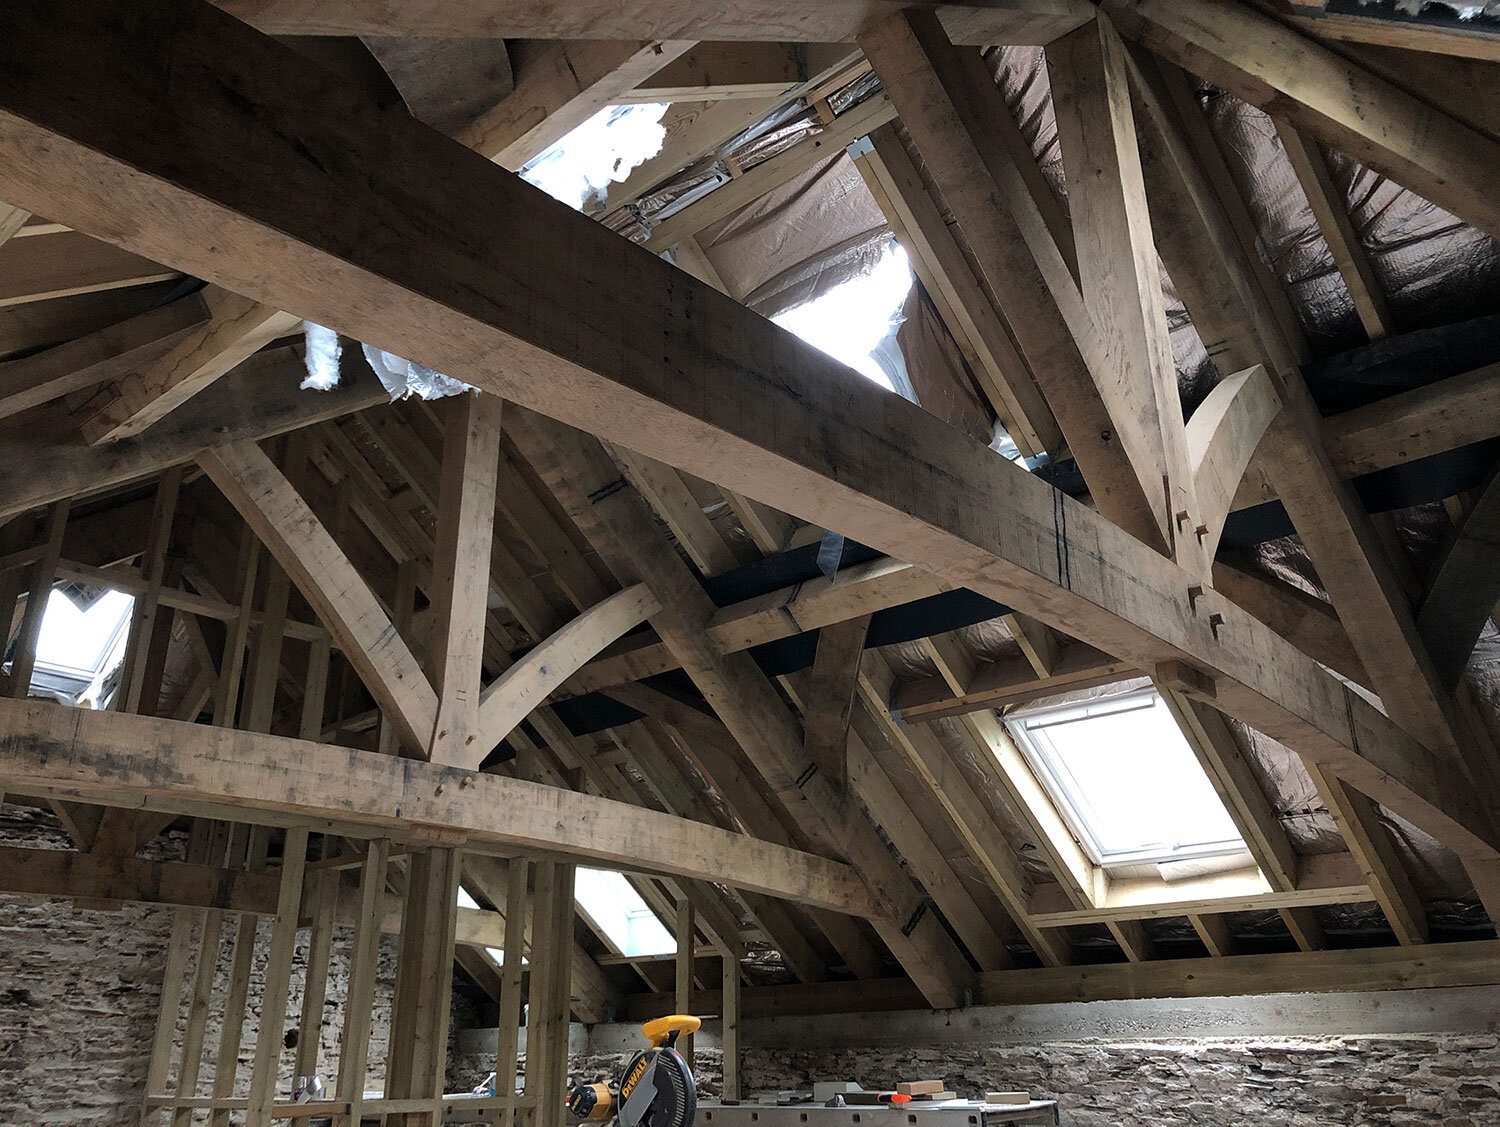 Timber framed roof and trusses with windows and insulation